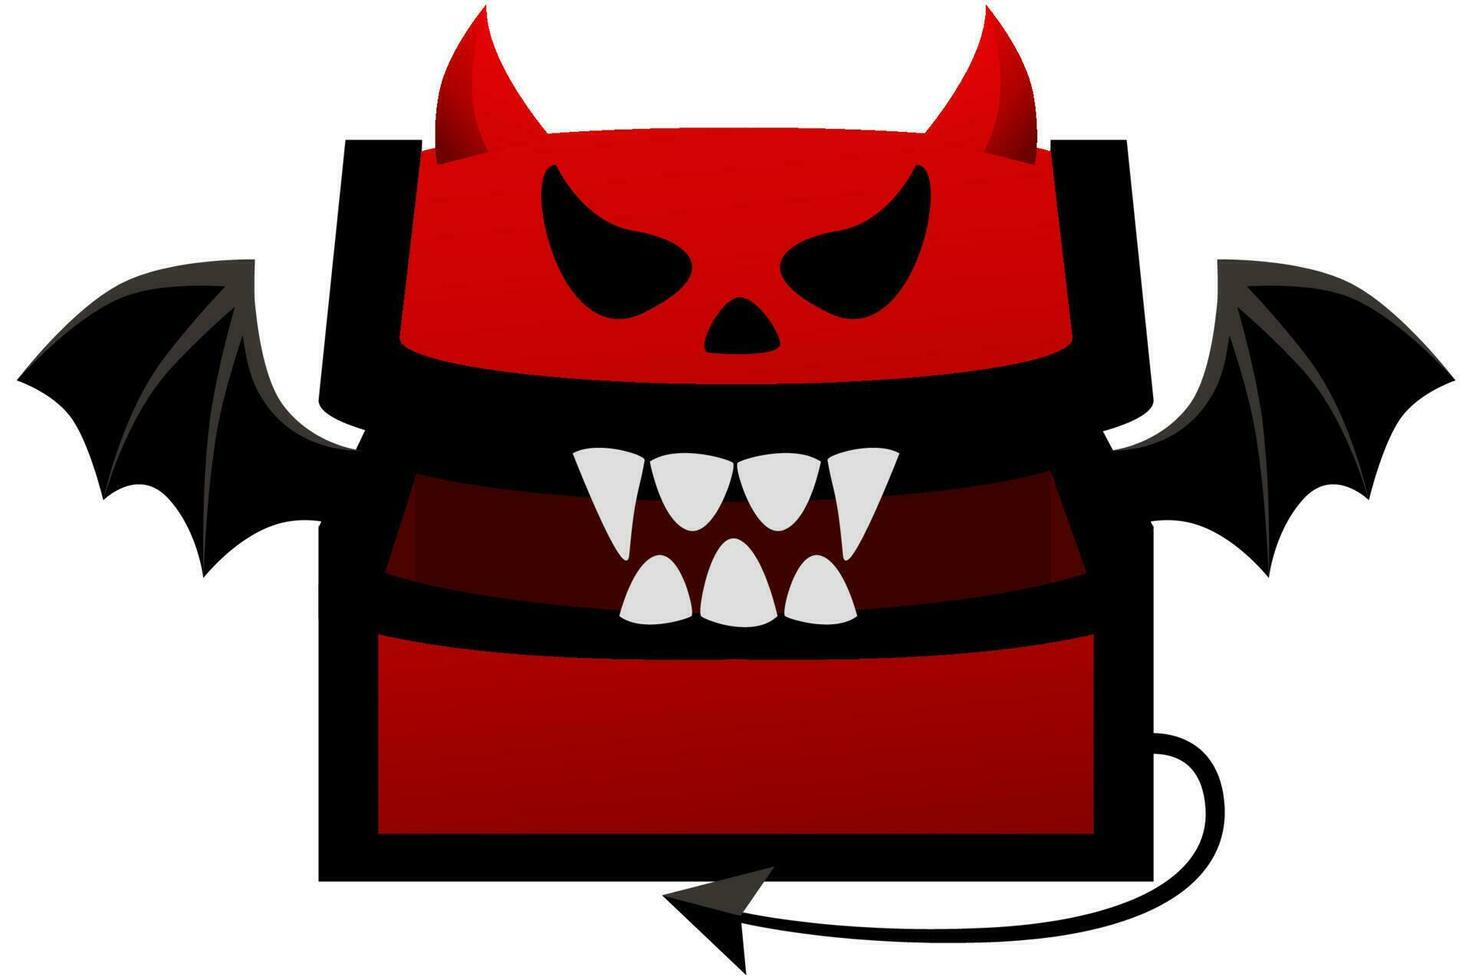 Devil chest, empty box, open red casket with wings, teeth and horns. Pc game item vector